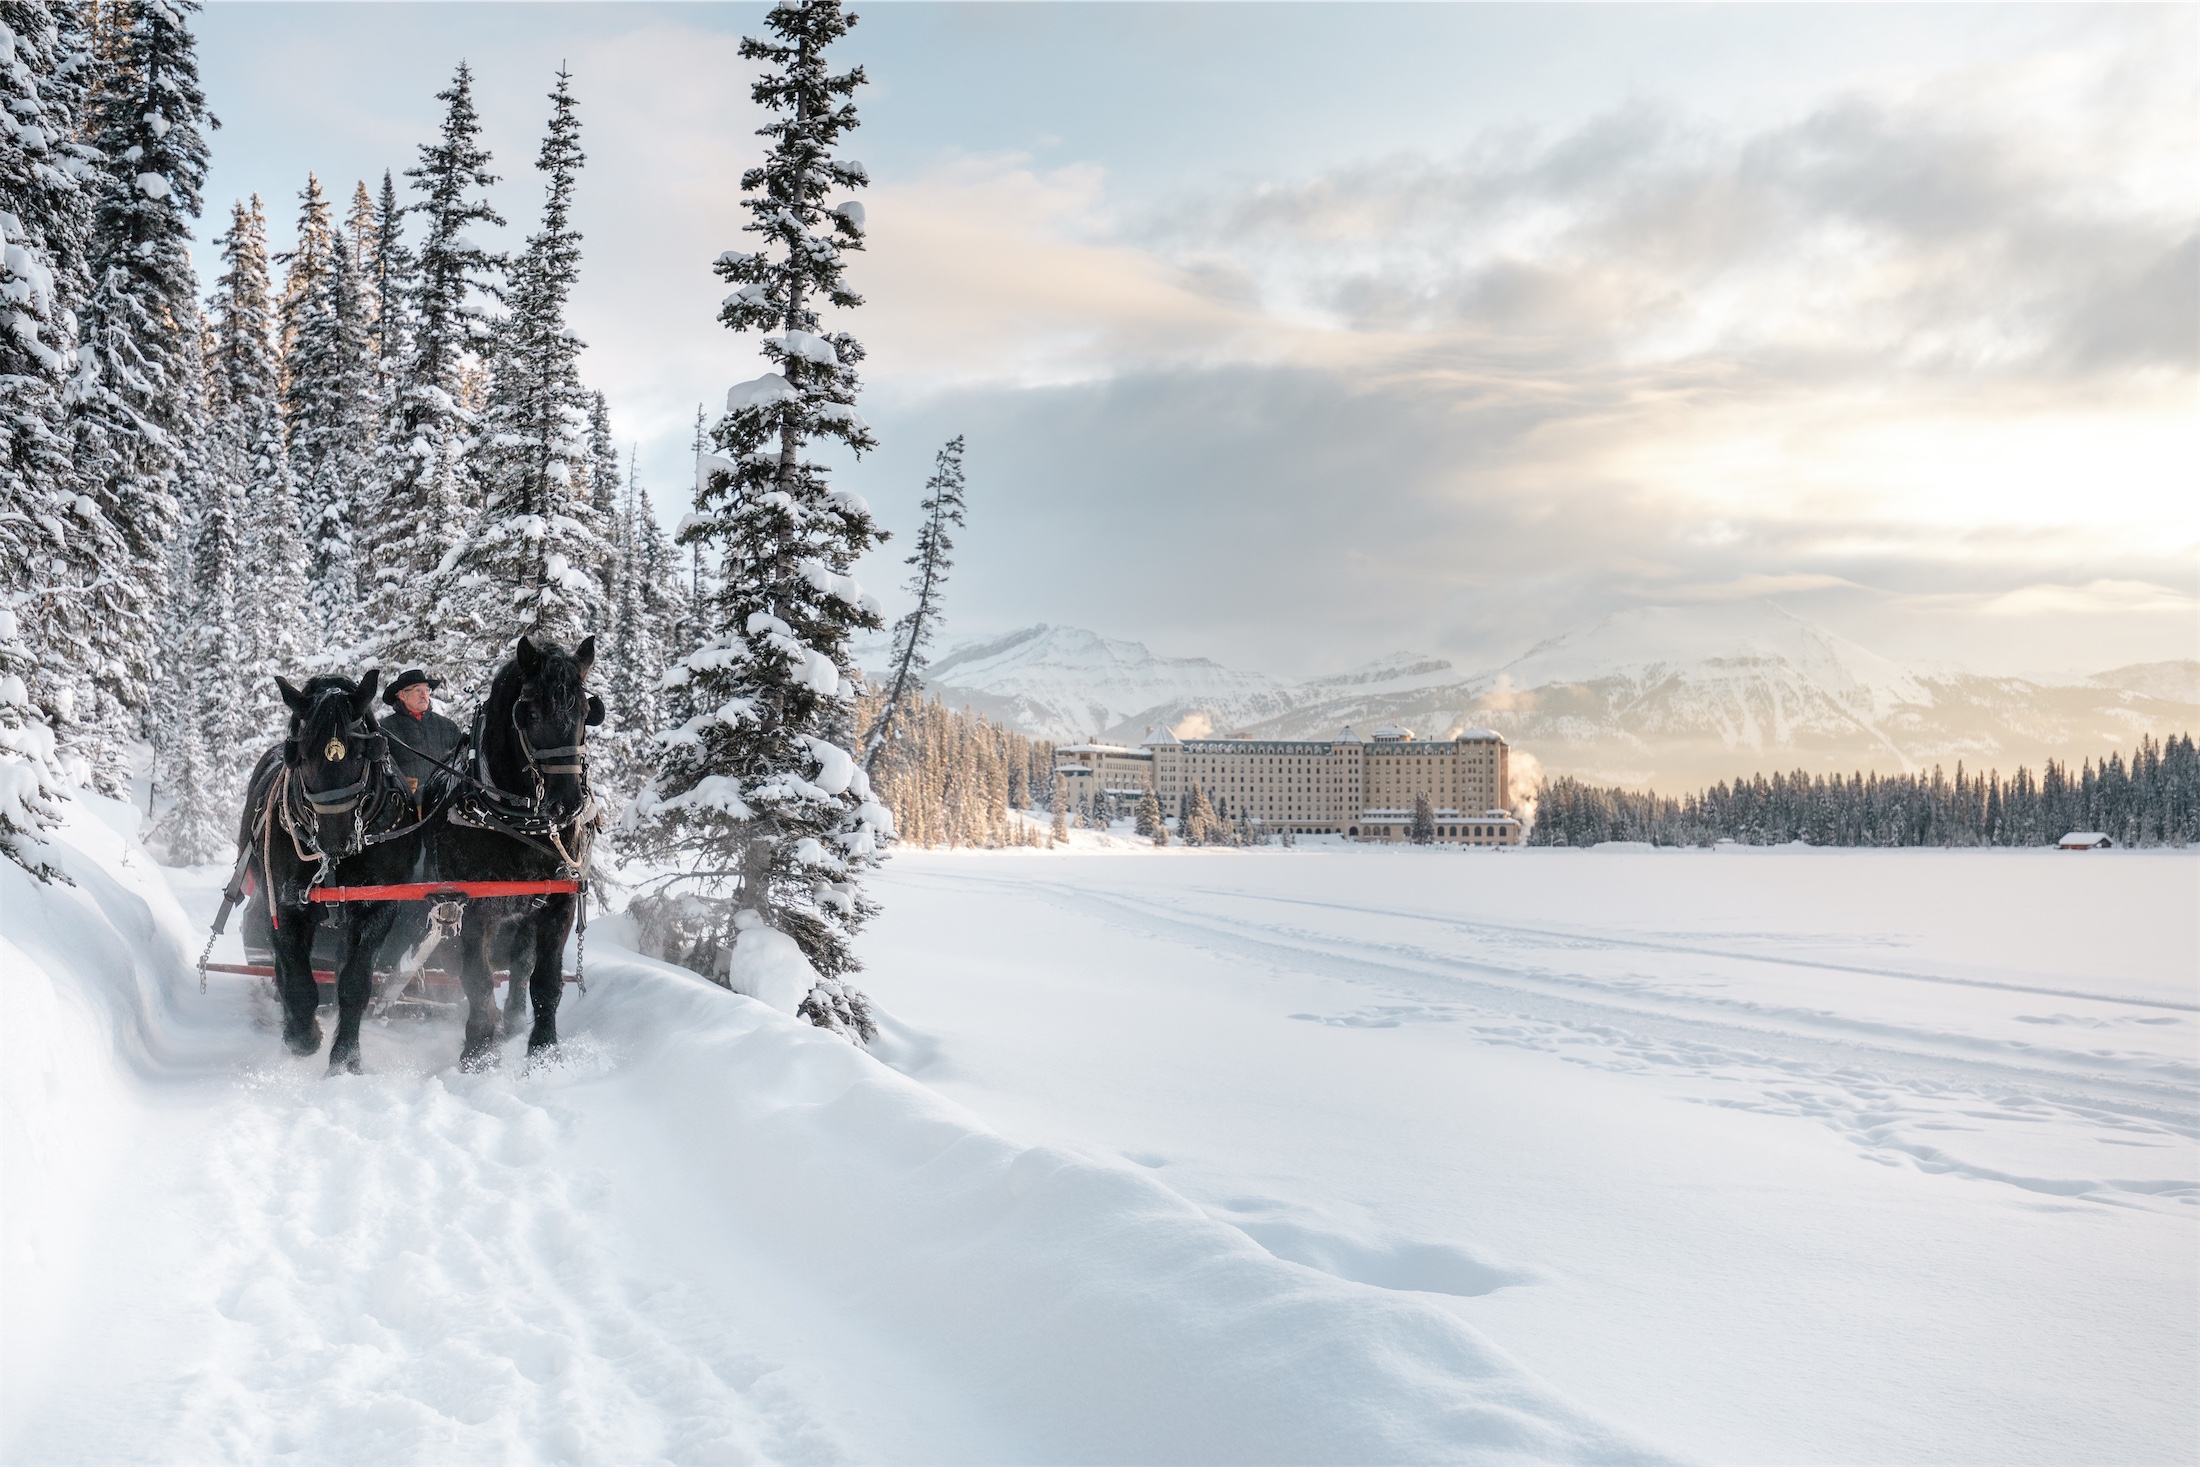 Winter Wonderland  Best Places to Visit in Alberta During the Winter